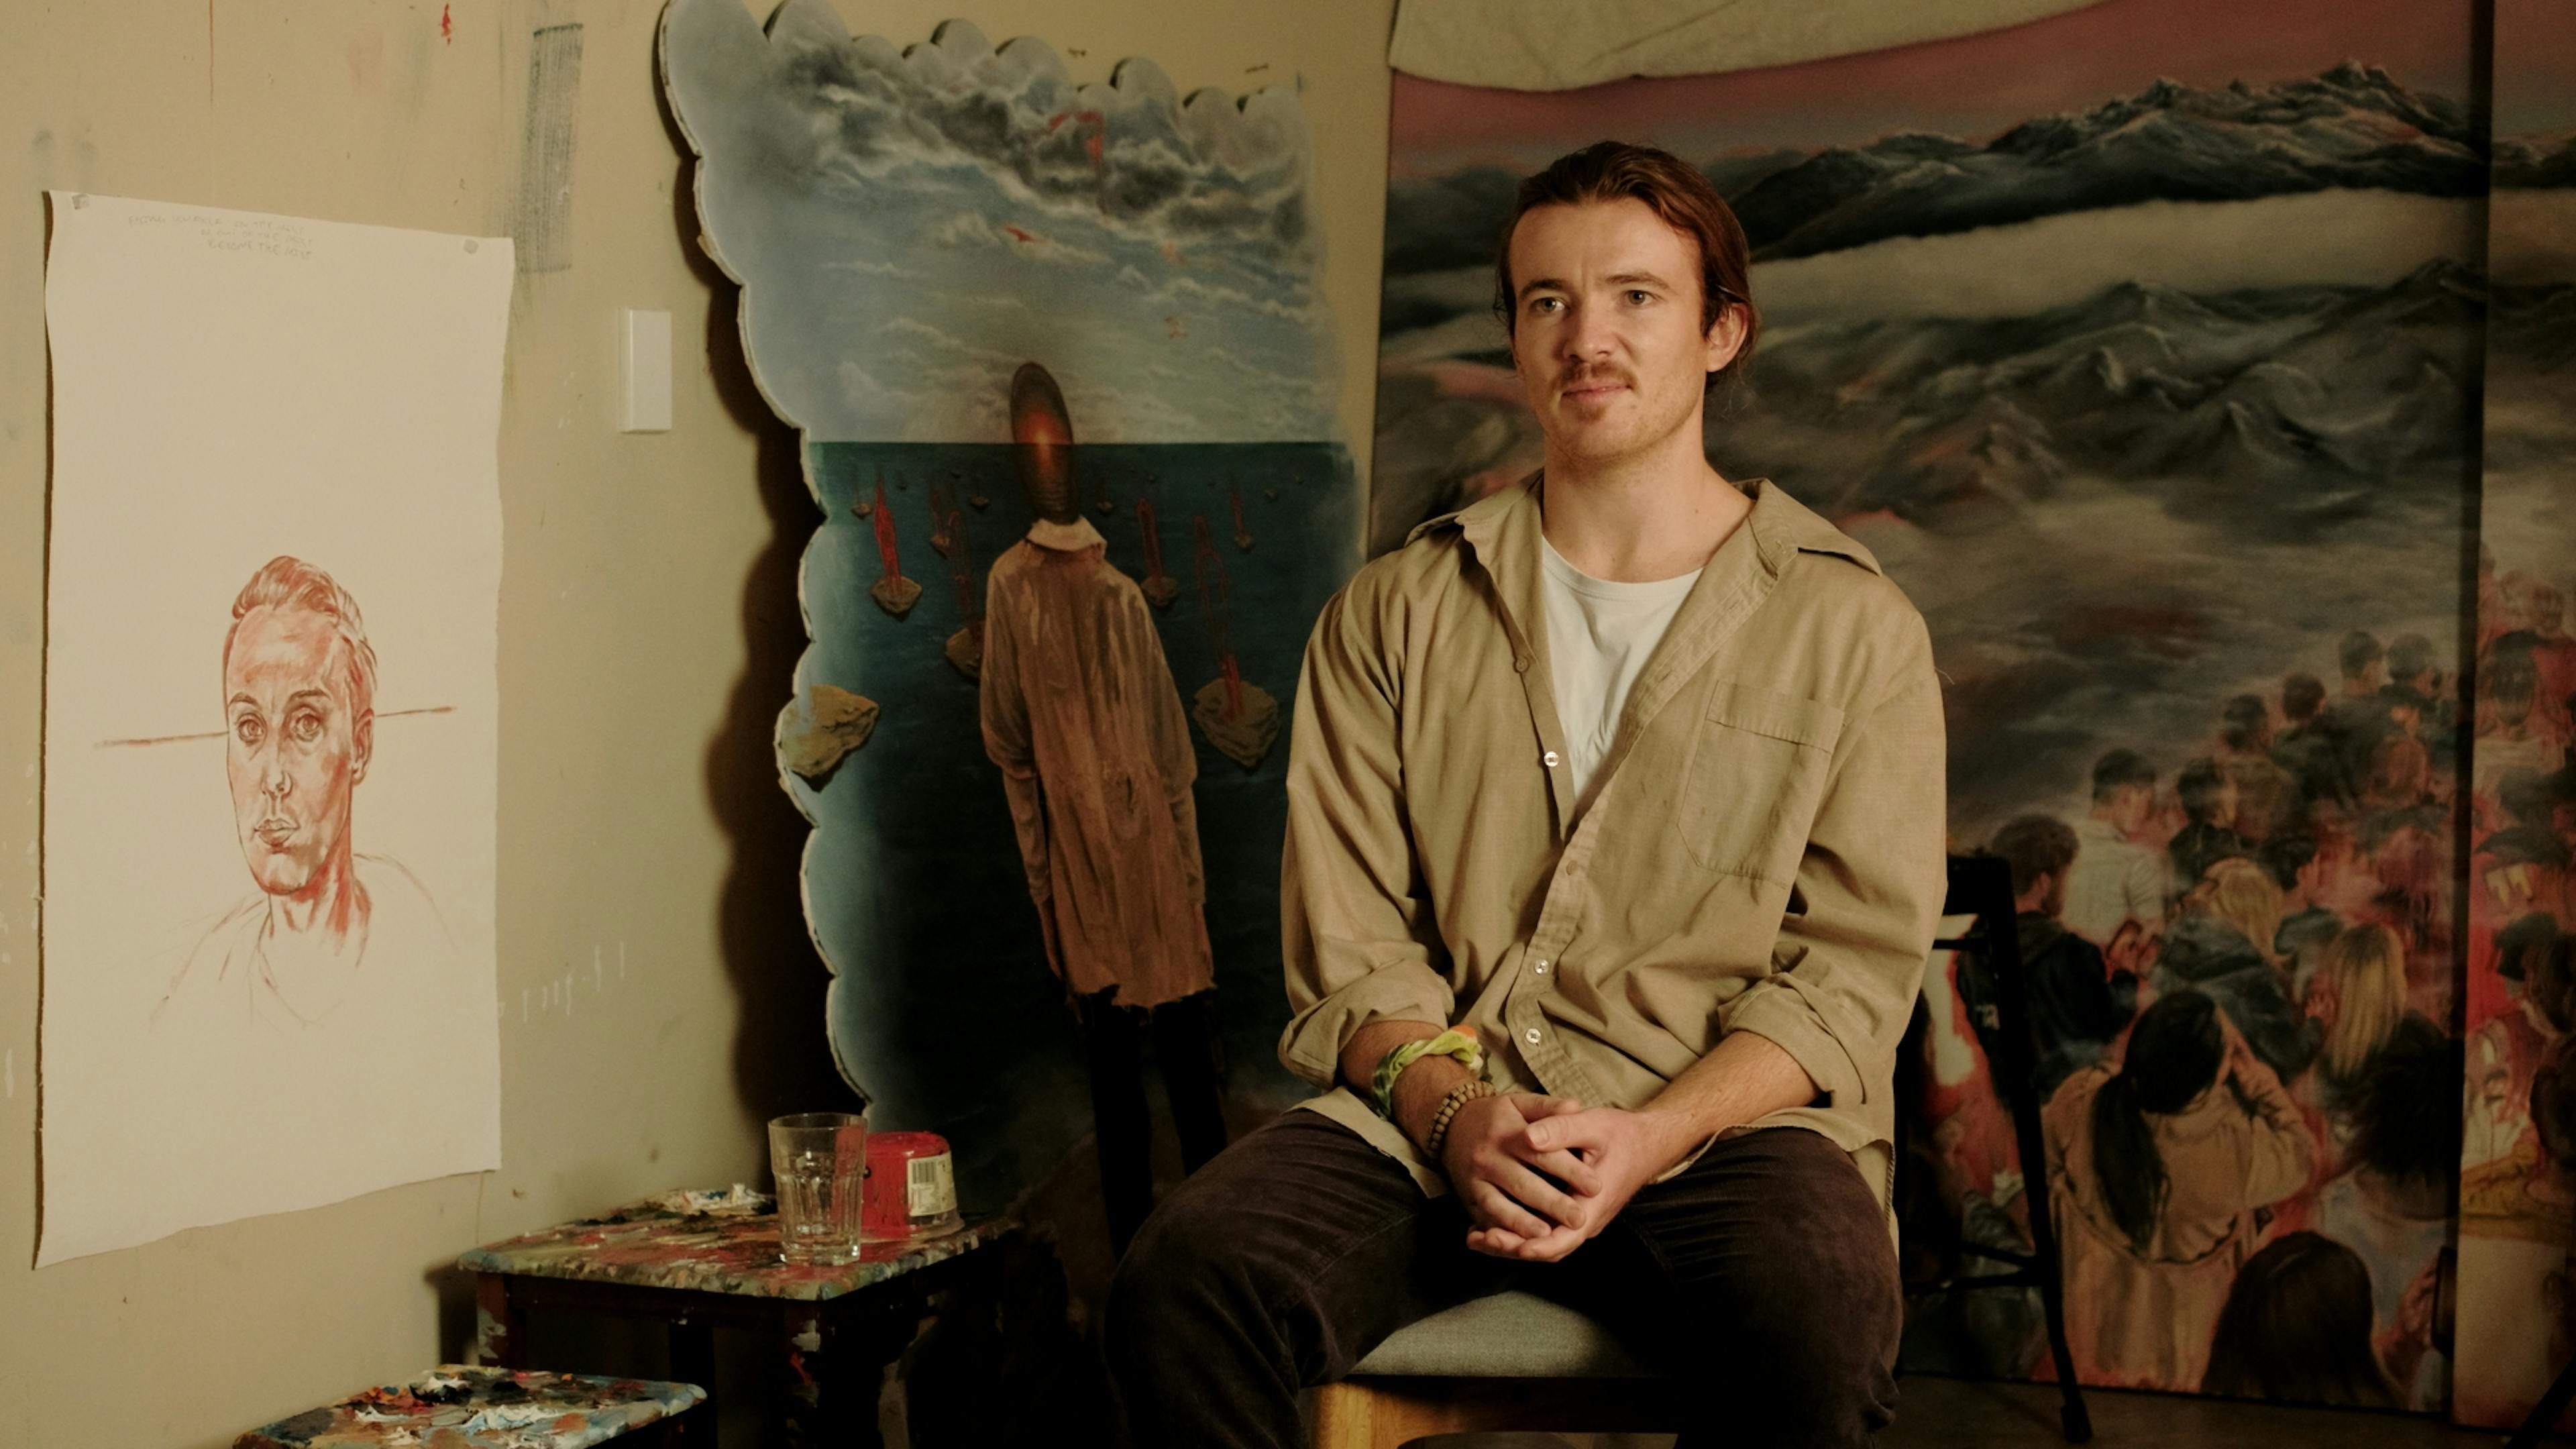 Artist Logan Moffat talks to Artfull about his painting practice. Emerging artist, Moffat is concerned with the portrait. What we see and how we absorb what we see. Social media and the falsehood of identity. The masks we all wear collide with the beauty of the natural world. Landscapes of New Zealand and China. Beaches. Mountains. All combine to create surreal, impossible imagination spaces and places.